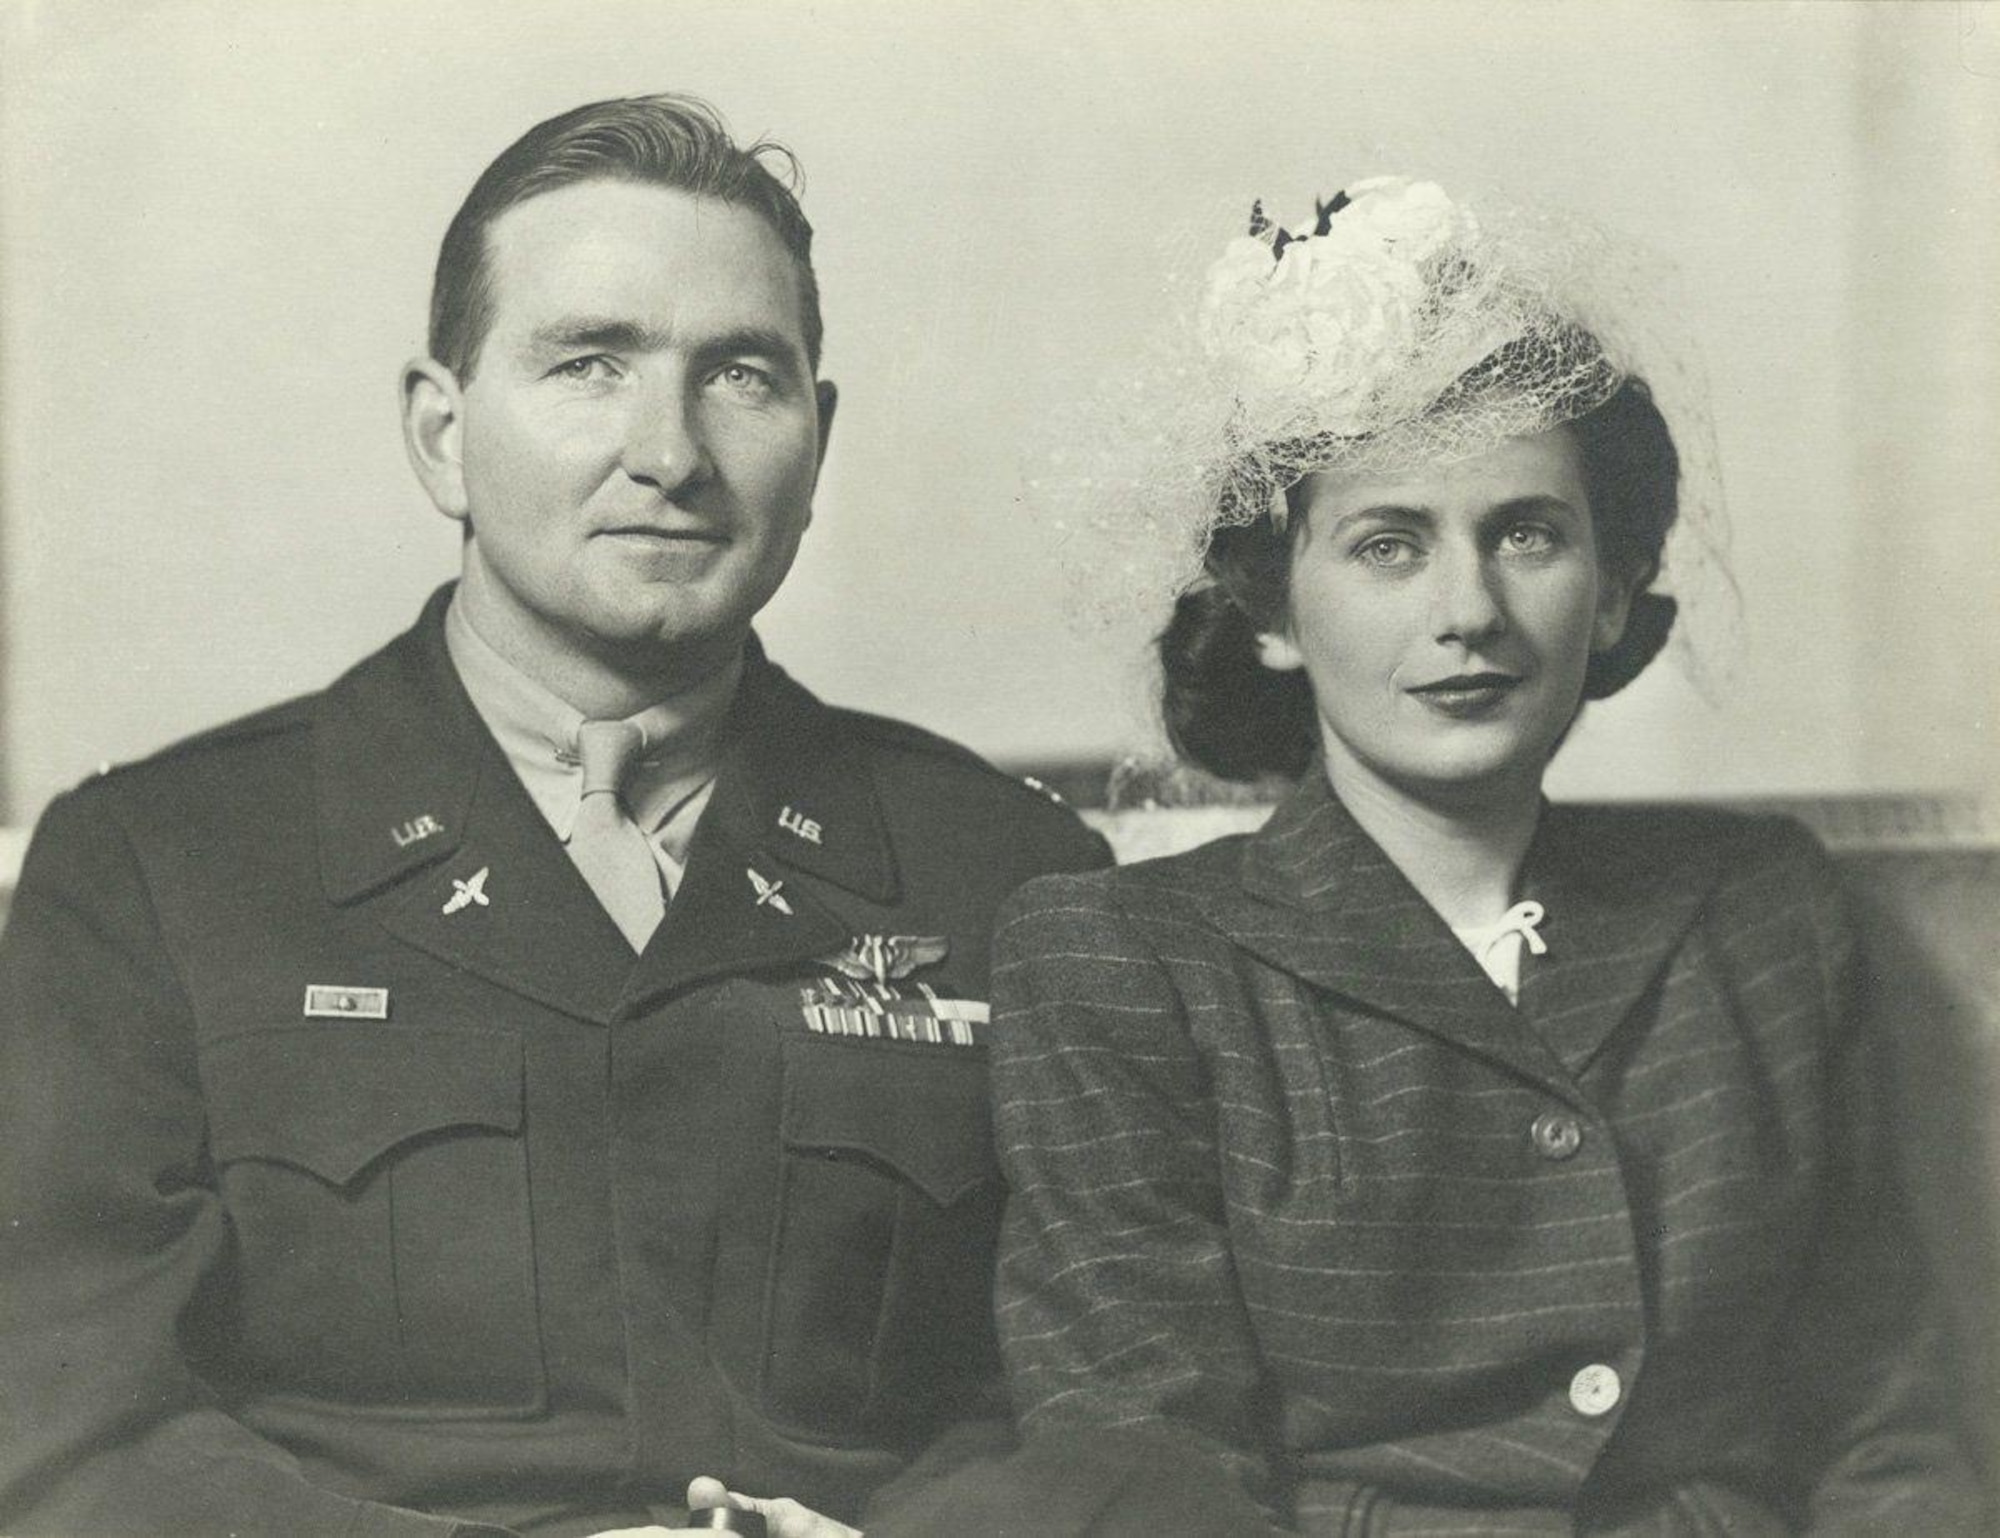 Retired Air Force Col. John Watters and his wife, Jean, pose for a wedding photo after World War II. Watters passed away in 2018 and his family donated his military literature collection to Offutt Air Force Base, Nebraska. (U.S. Air Force courtesy photo)